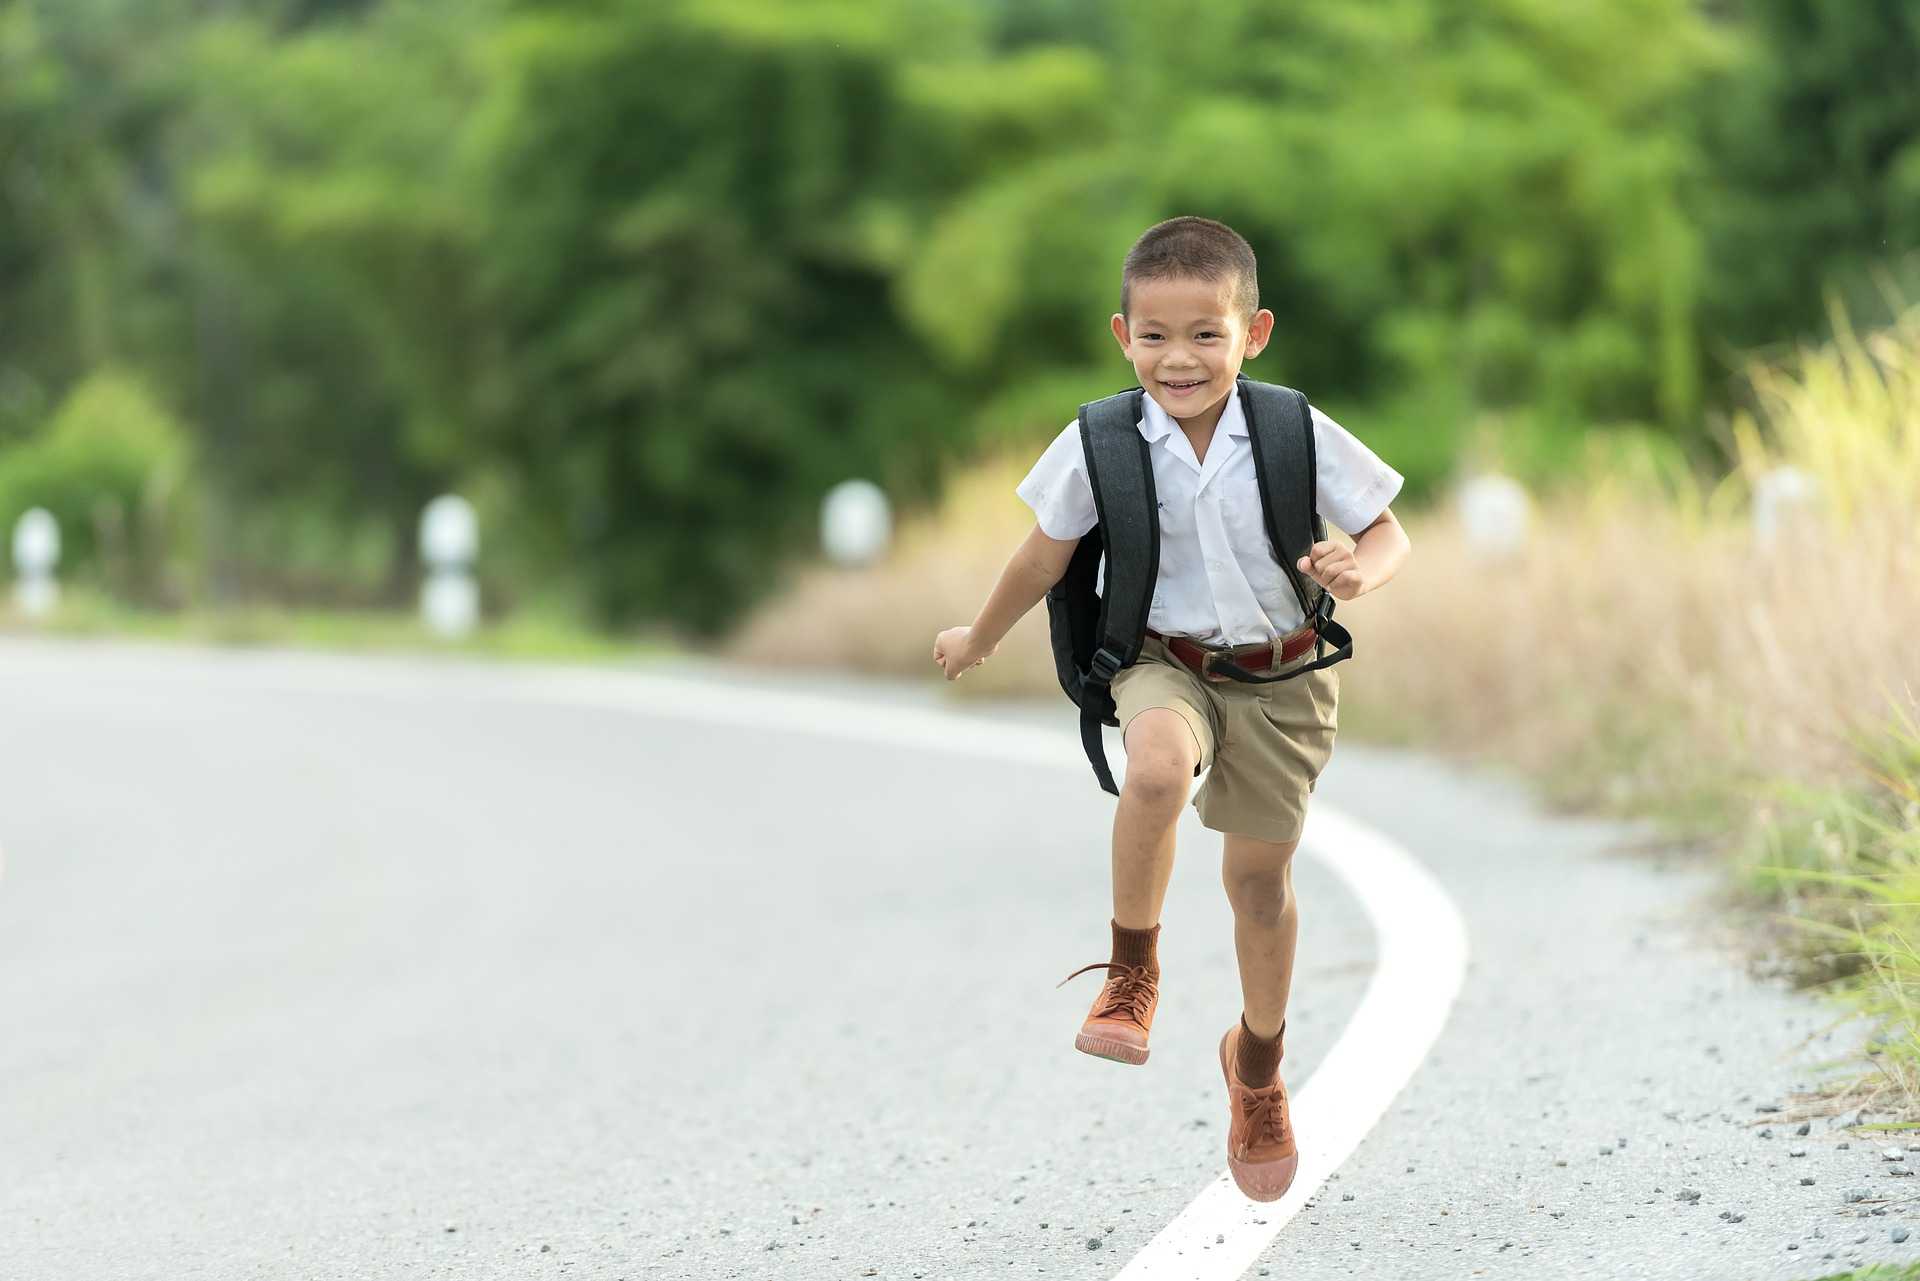 A boy with a backpack running down the street